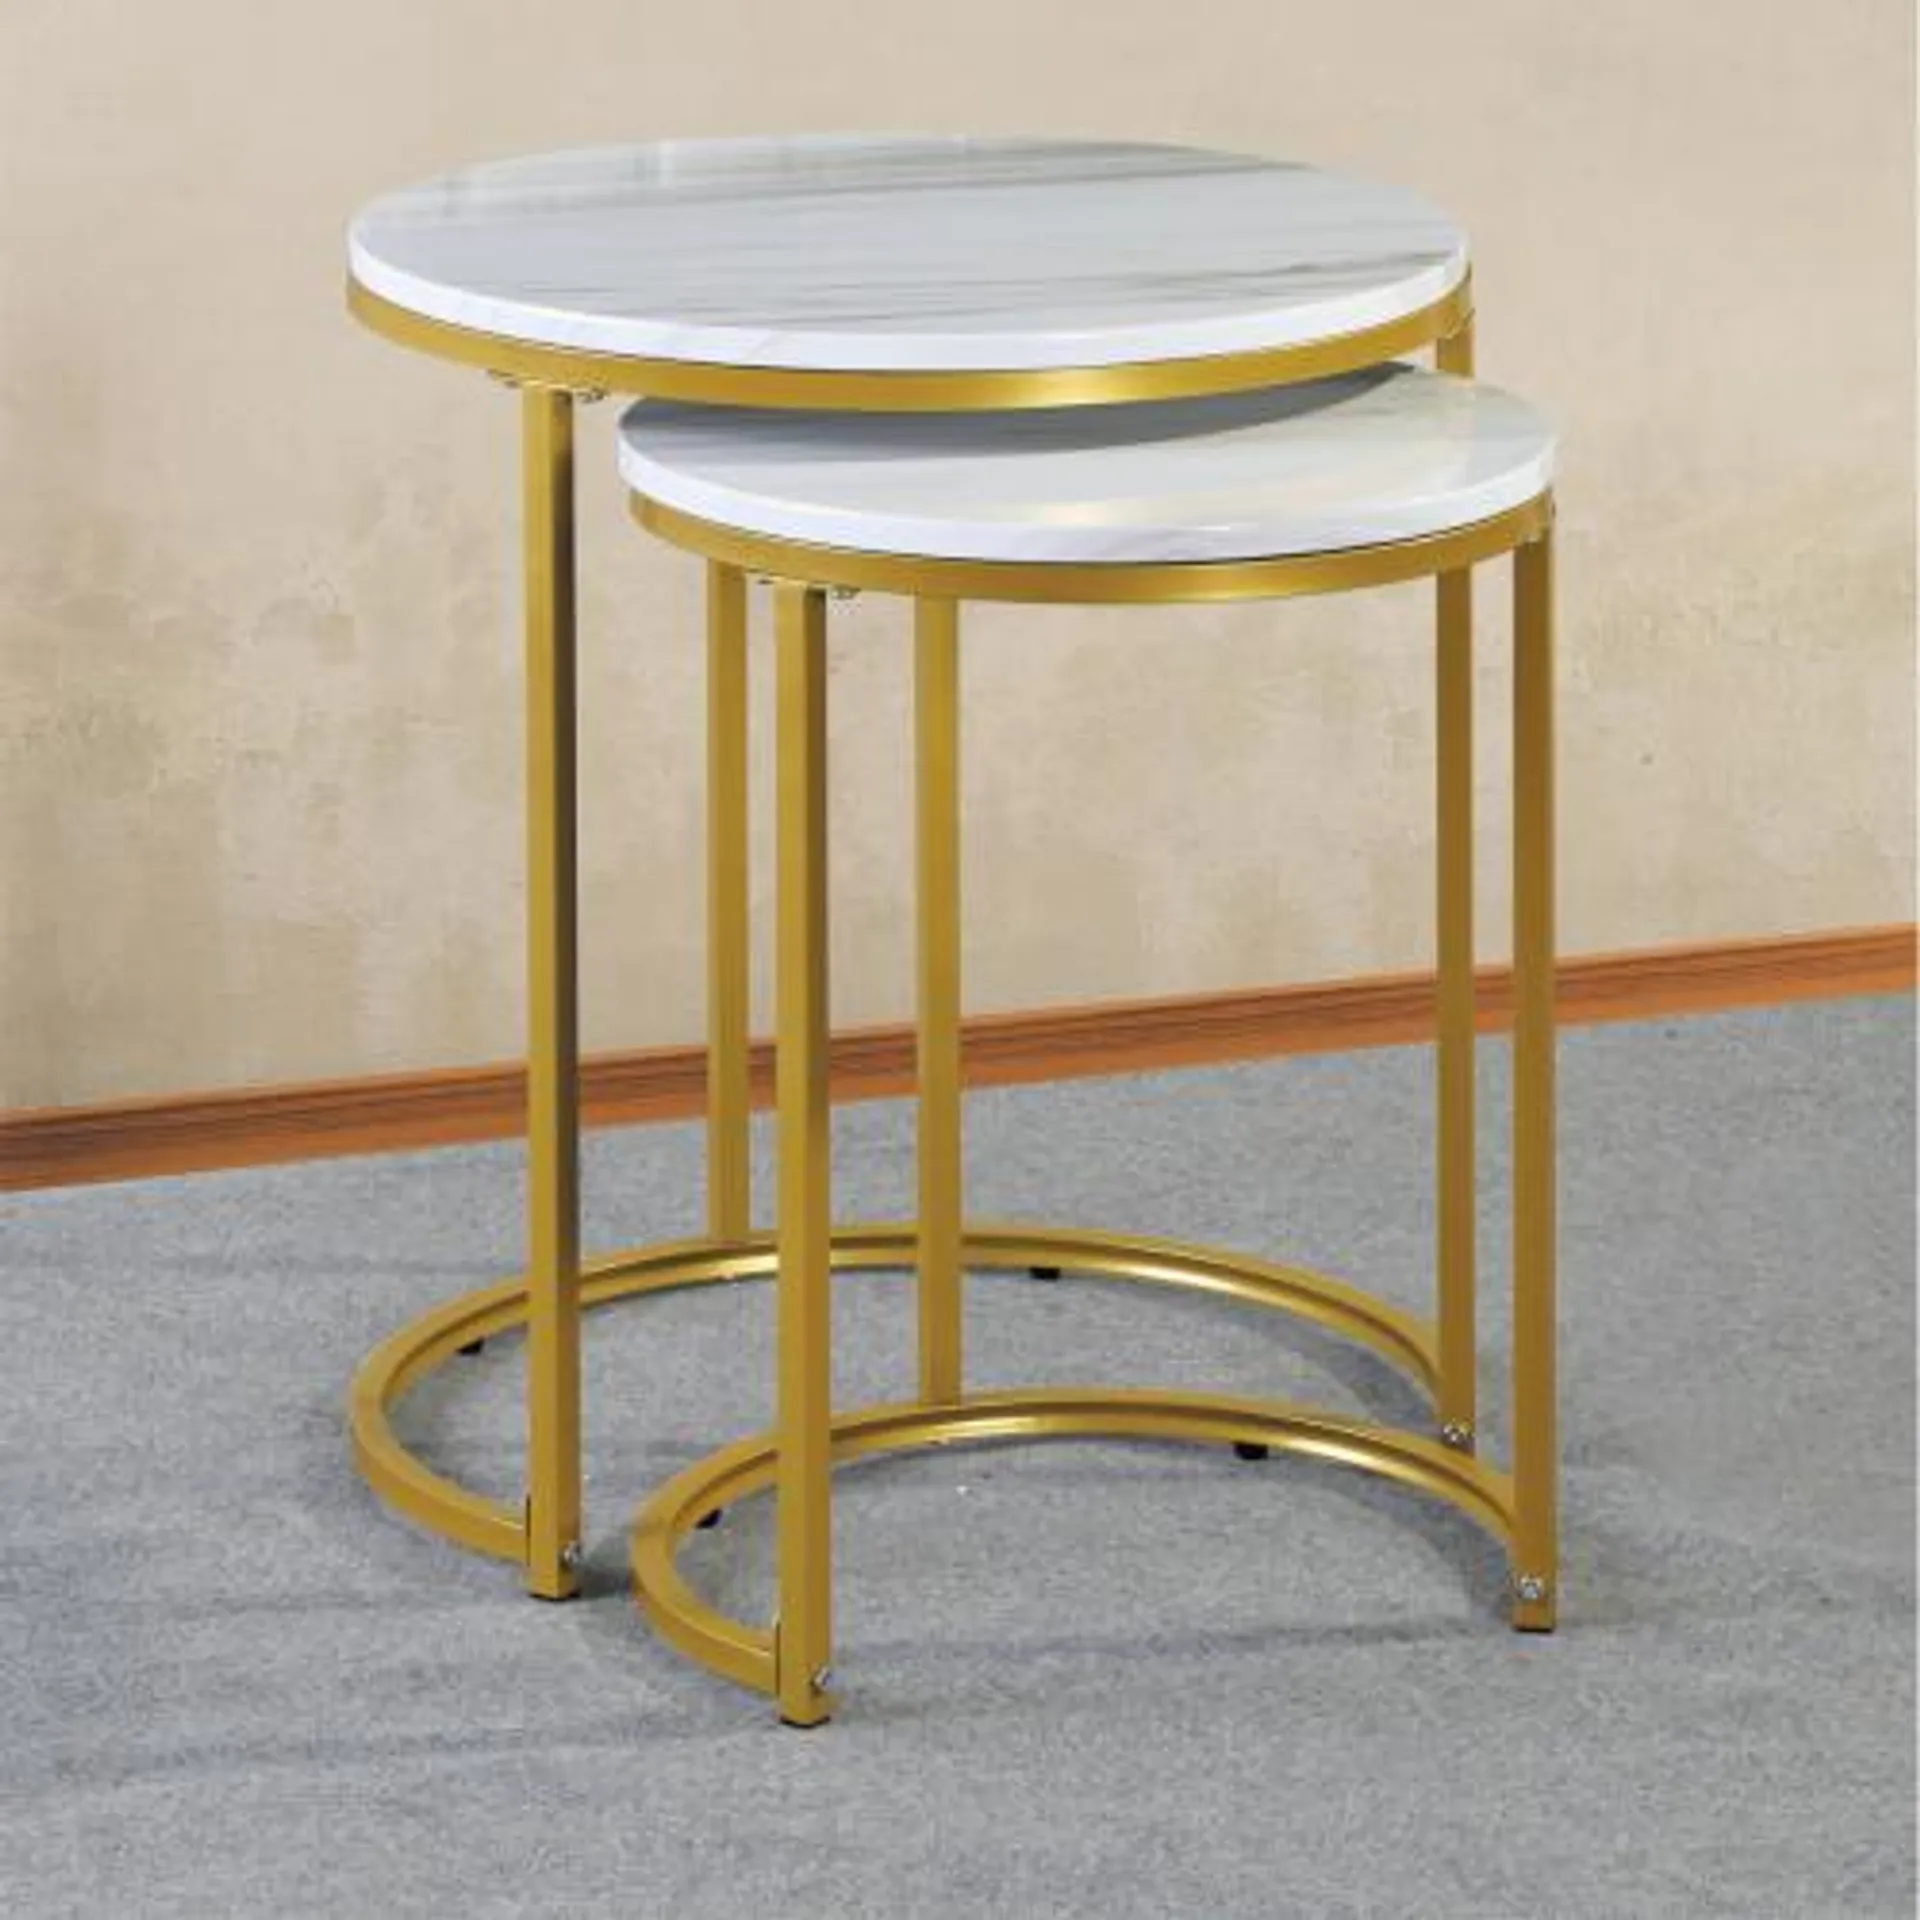 2pc Set Round Coffee Table White/gold Color Frame